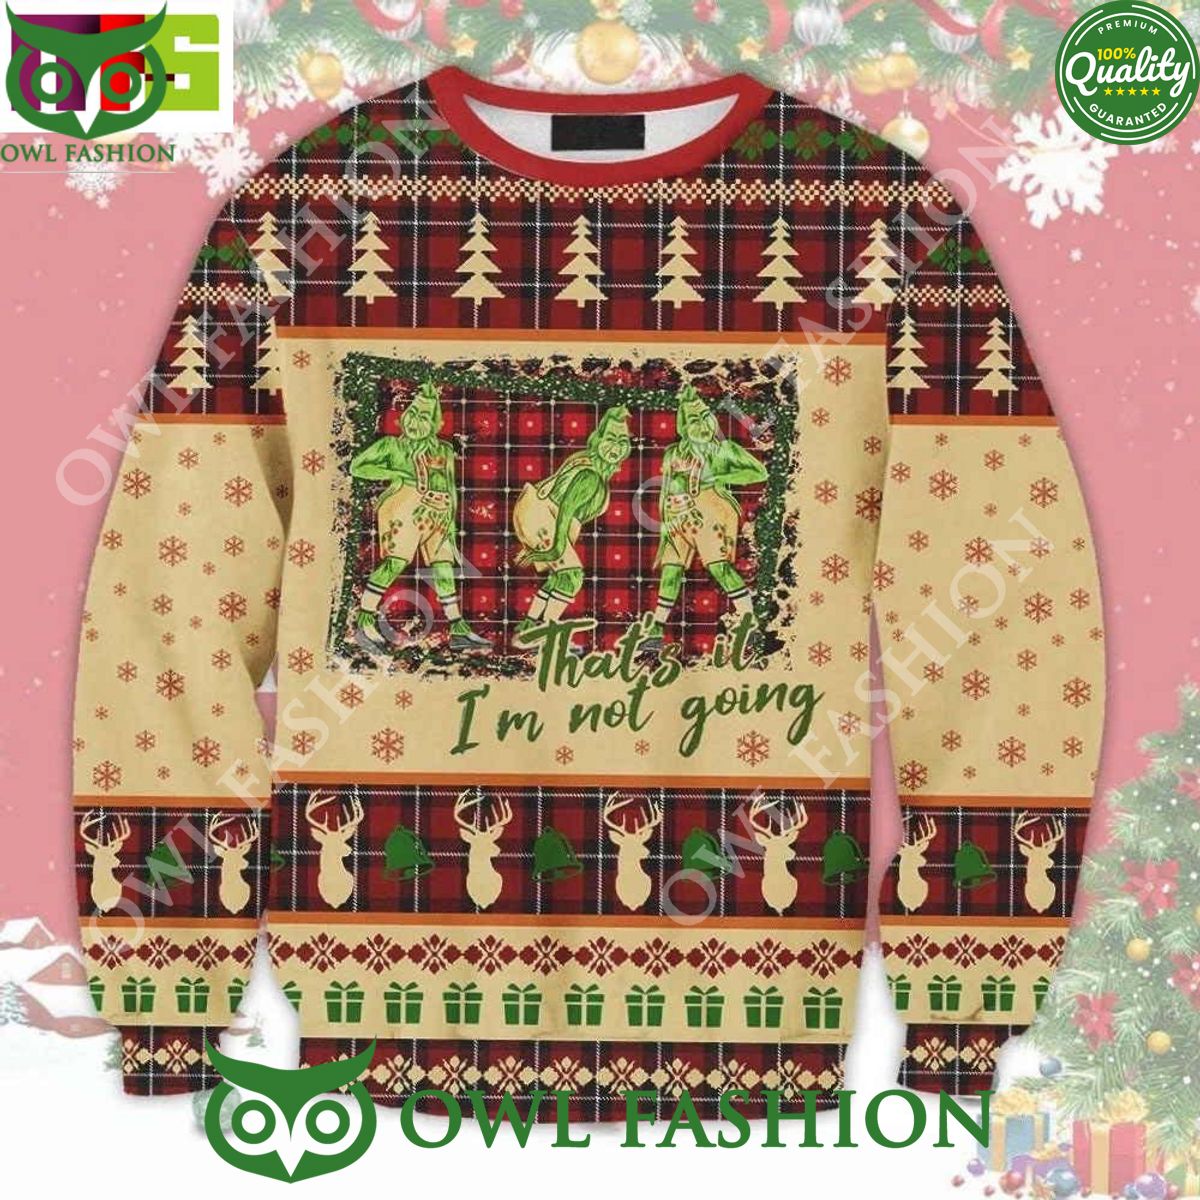 the vintage grinch that is i am not going christmas ugly sweater 2023 1 z3poD.jpg